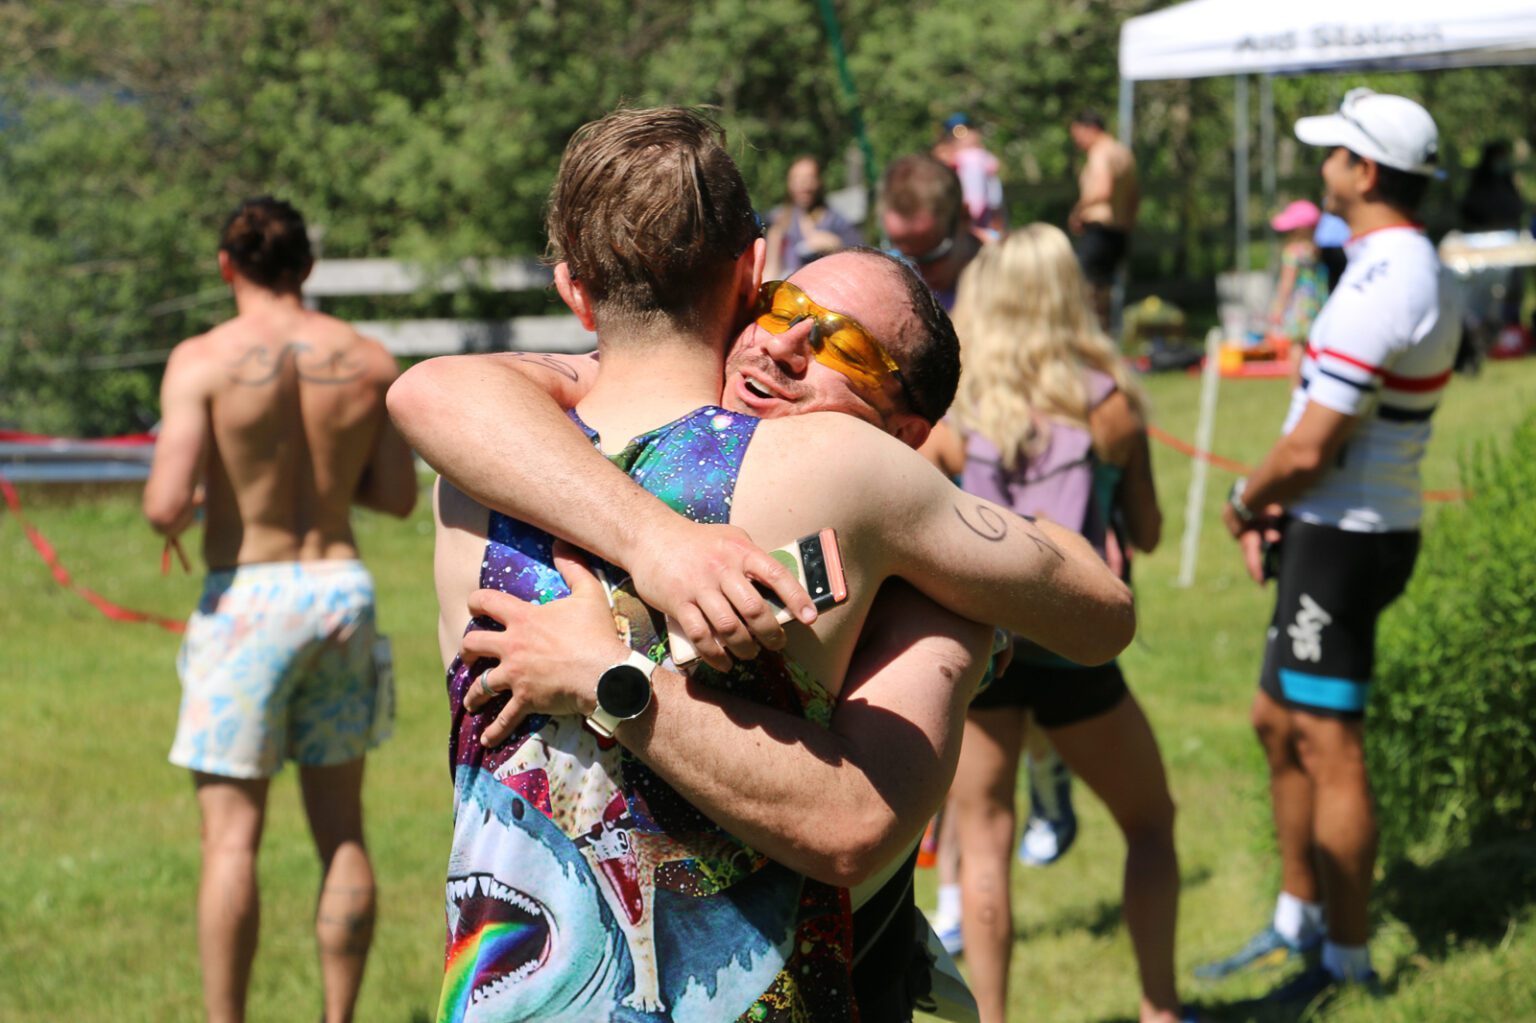 Triathlon finishers hug after the long-course Padden Triathlon race on June 25. The long-course race involved a half-mile of swimming